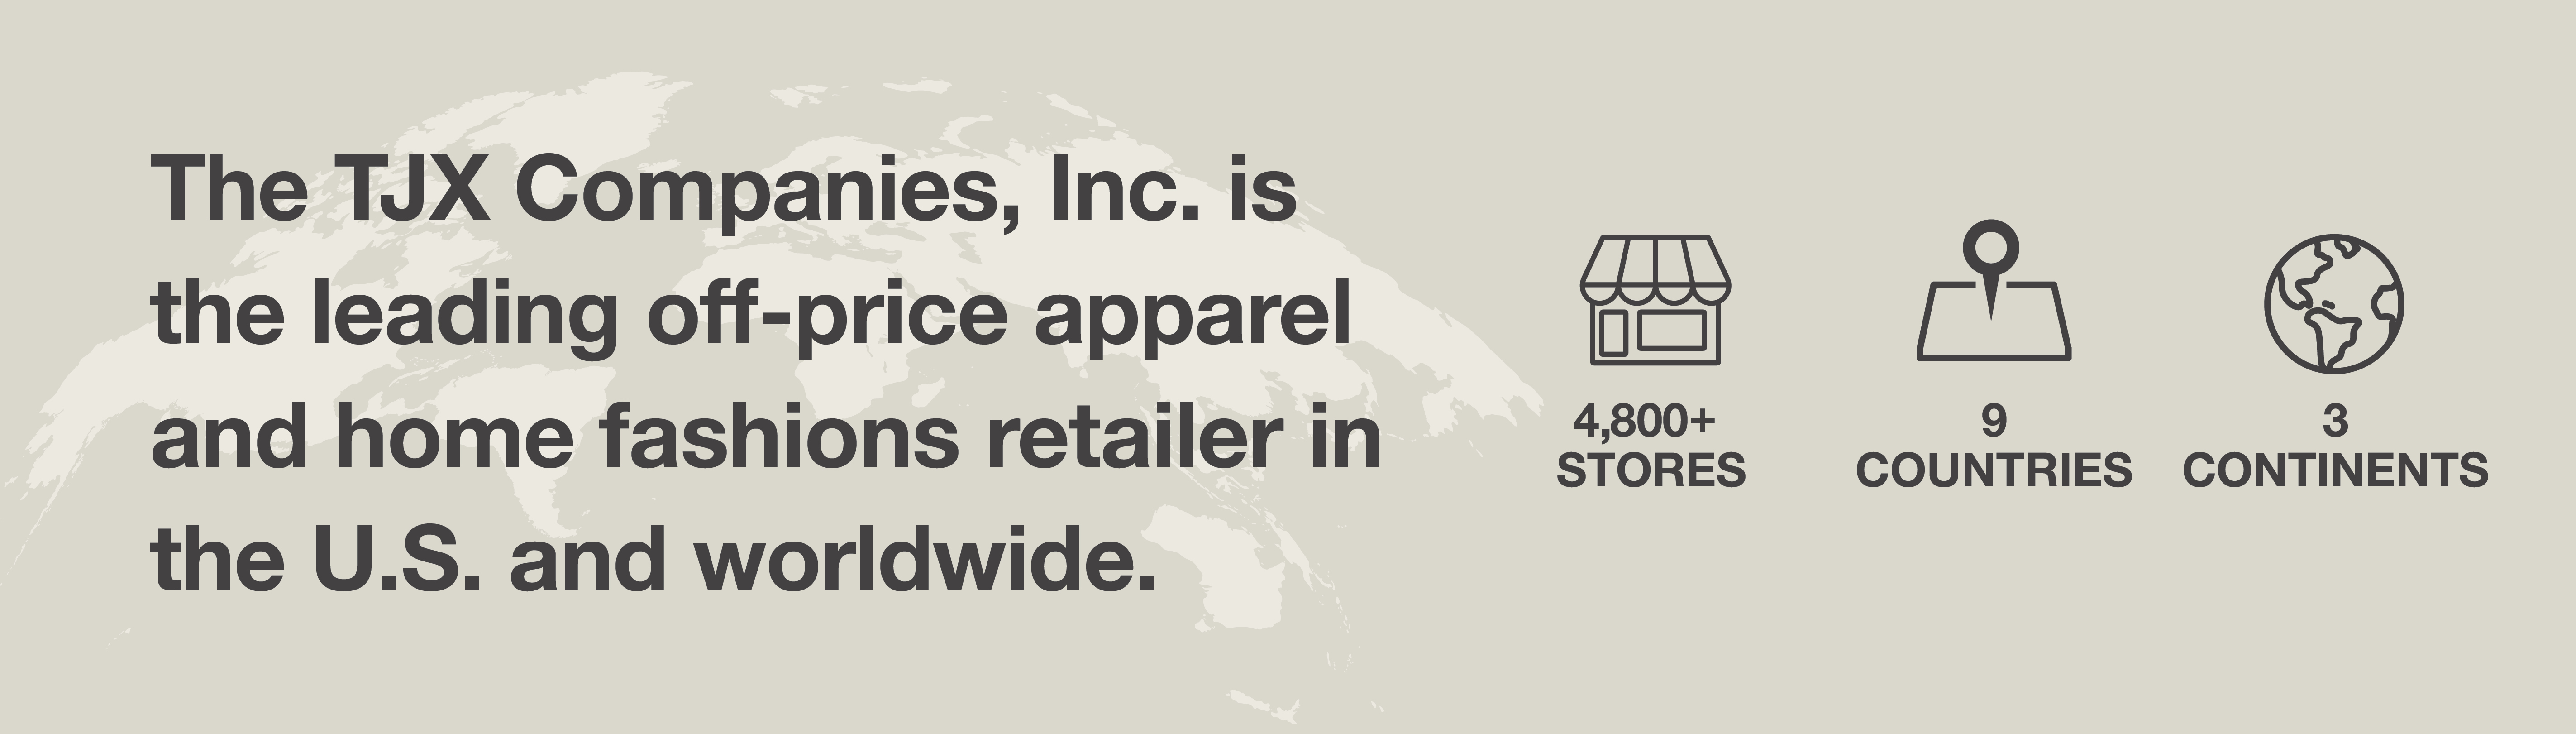 TJX leading off-price retailer with 4,800+ stores in 9 countries on 3 continents